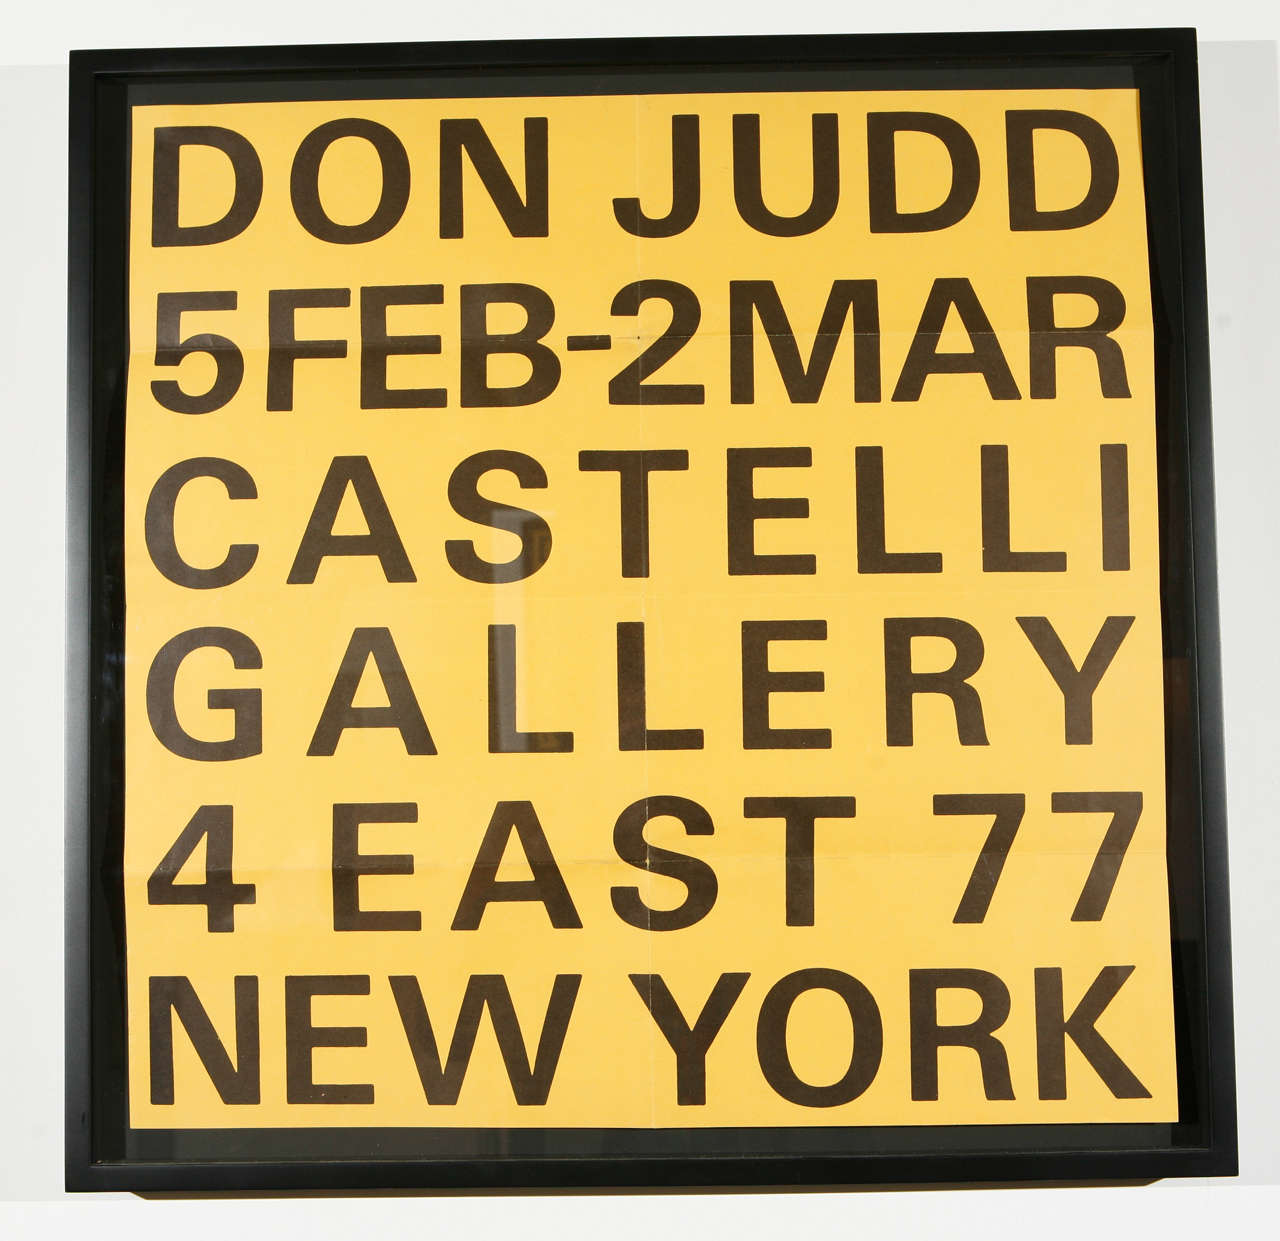 This original 1966 lithograph announcing a Donald Judd exhibition at the Leo Castelli gallery in New York City was designed by Judd himself.  Exceedingly rare, this announcement was originally folded and mailed to patrons of the Castelli